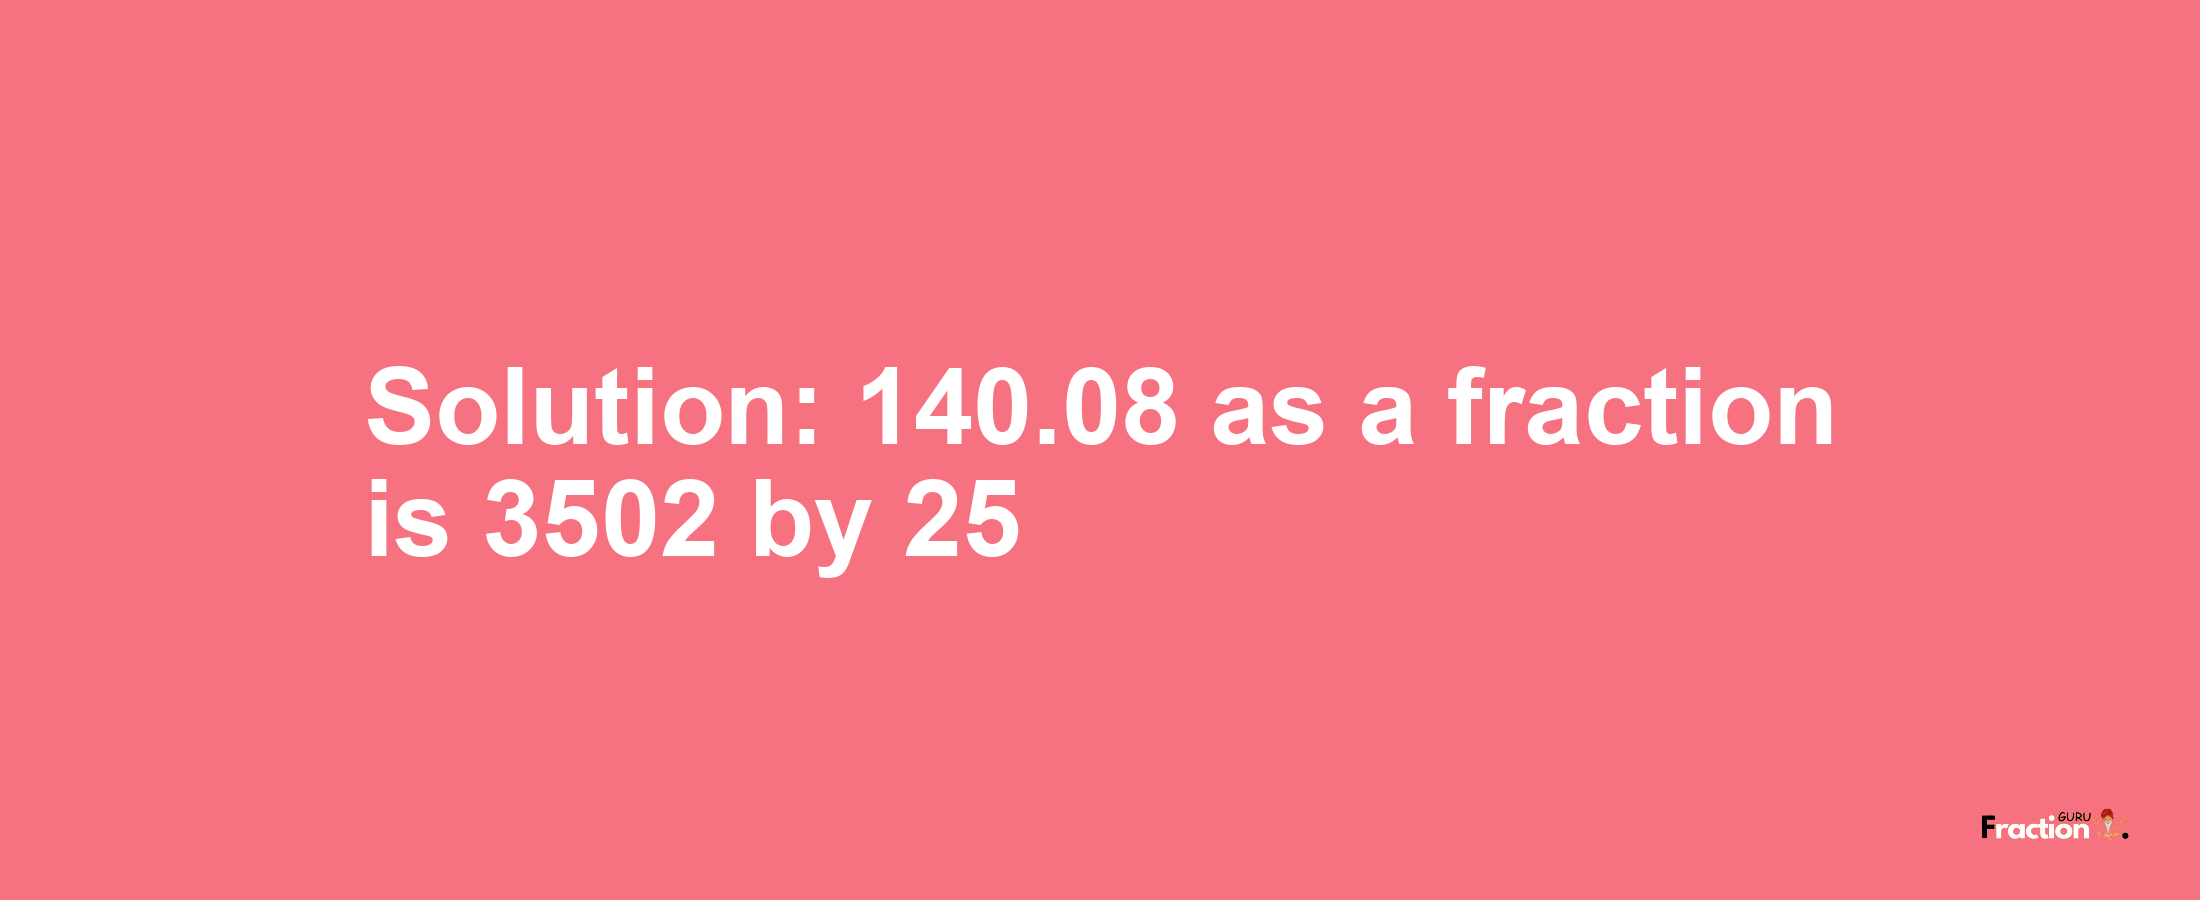 Solution:140.08 as a fraction is 3502/25